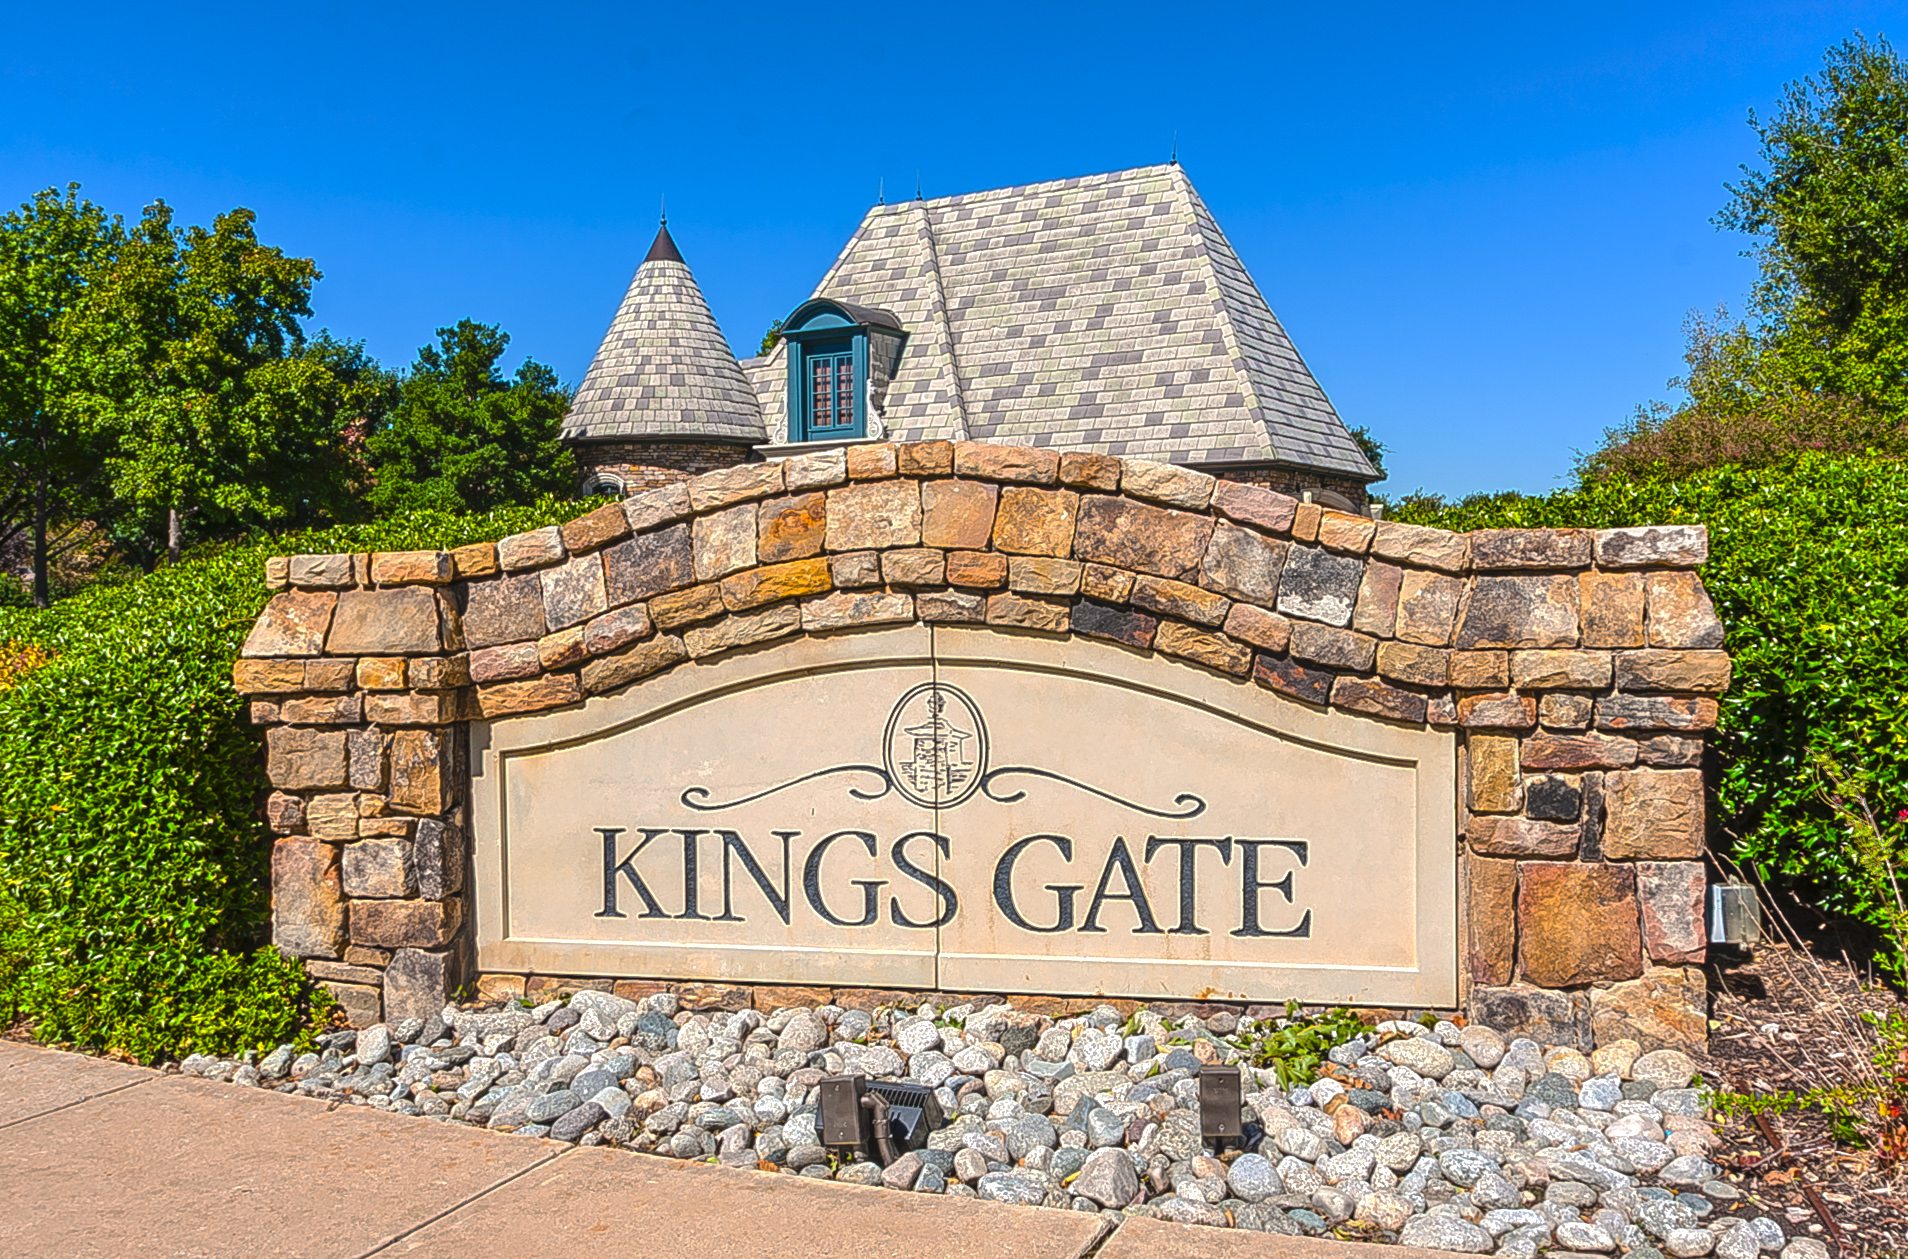 Kings Gate sign in Plano